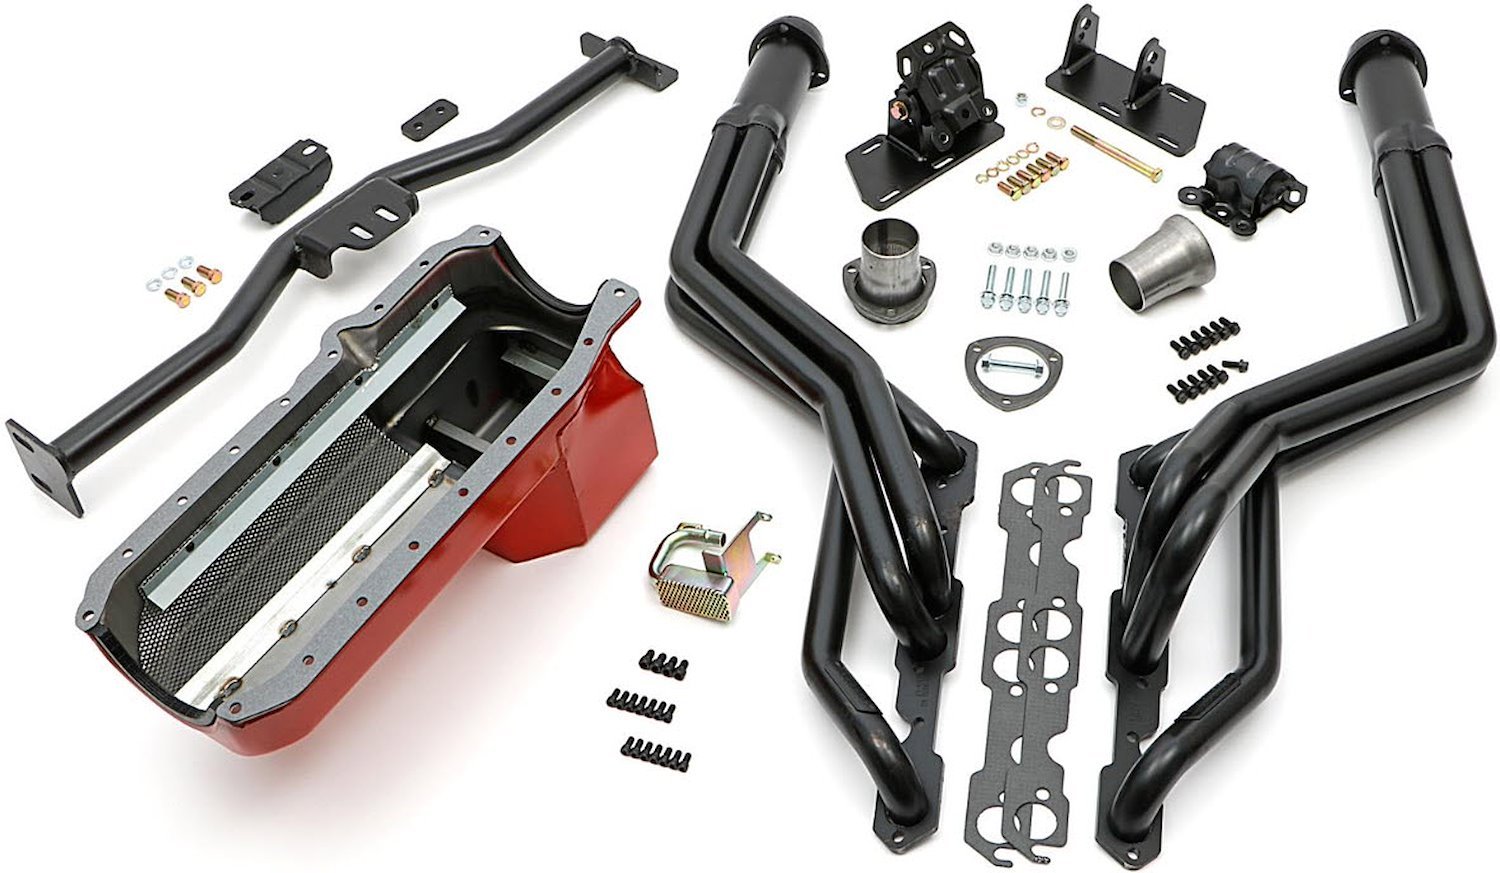 Swap in a Box Kit 1986-2000 Small Block Chevy into 1982-2004 Chevy S10/GMC S15